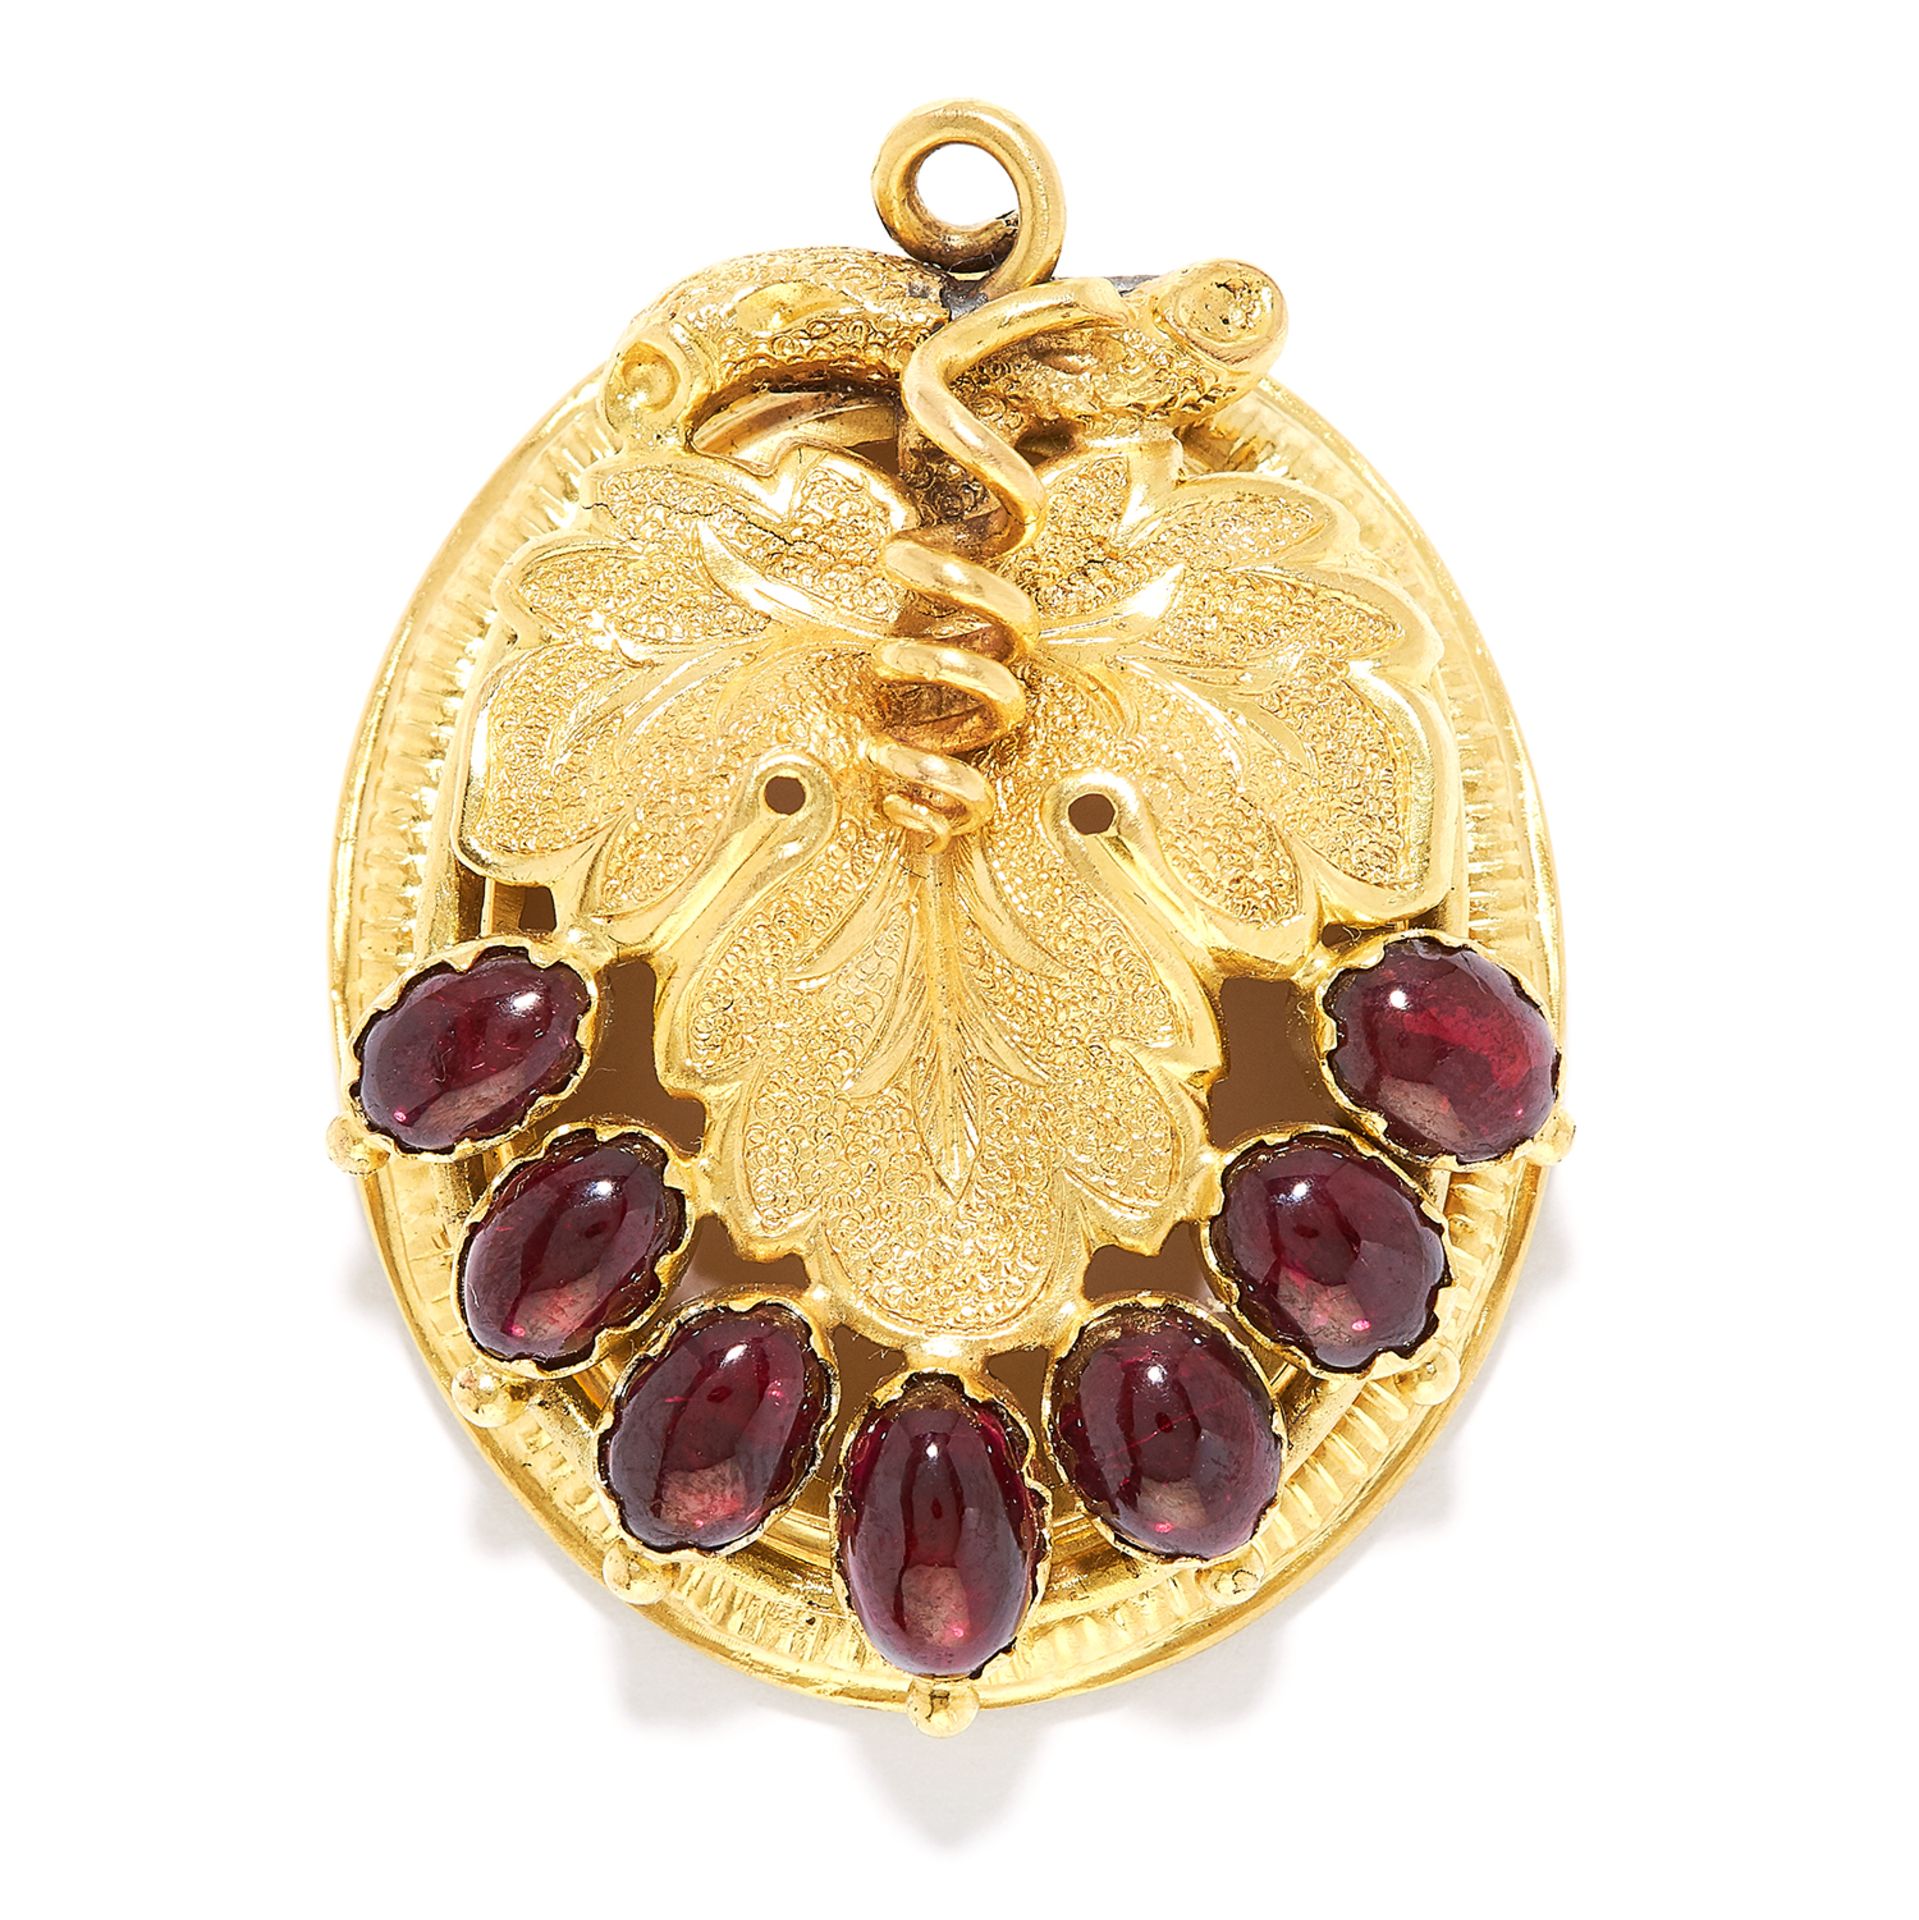 GARNET PENDANT in high carat yellow gold, the hinged body depicting a leaf set with cabochon